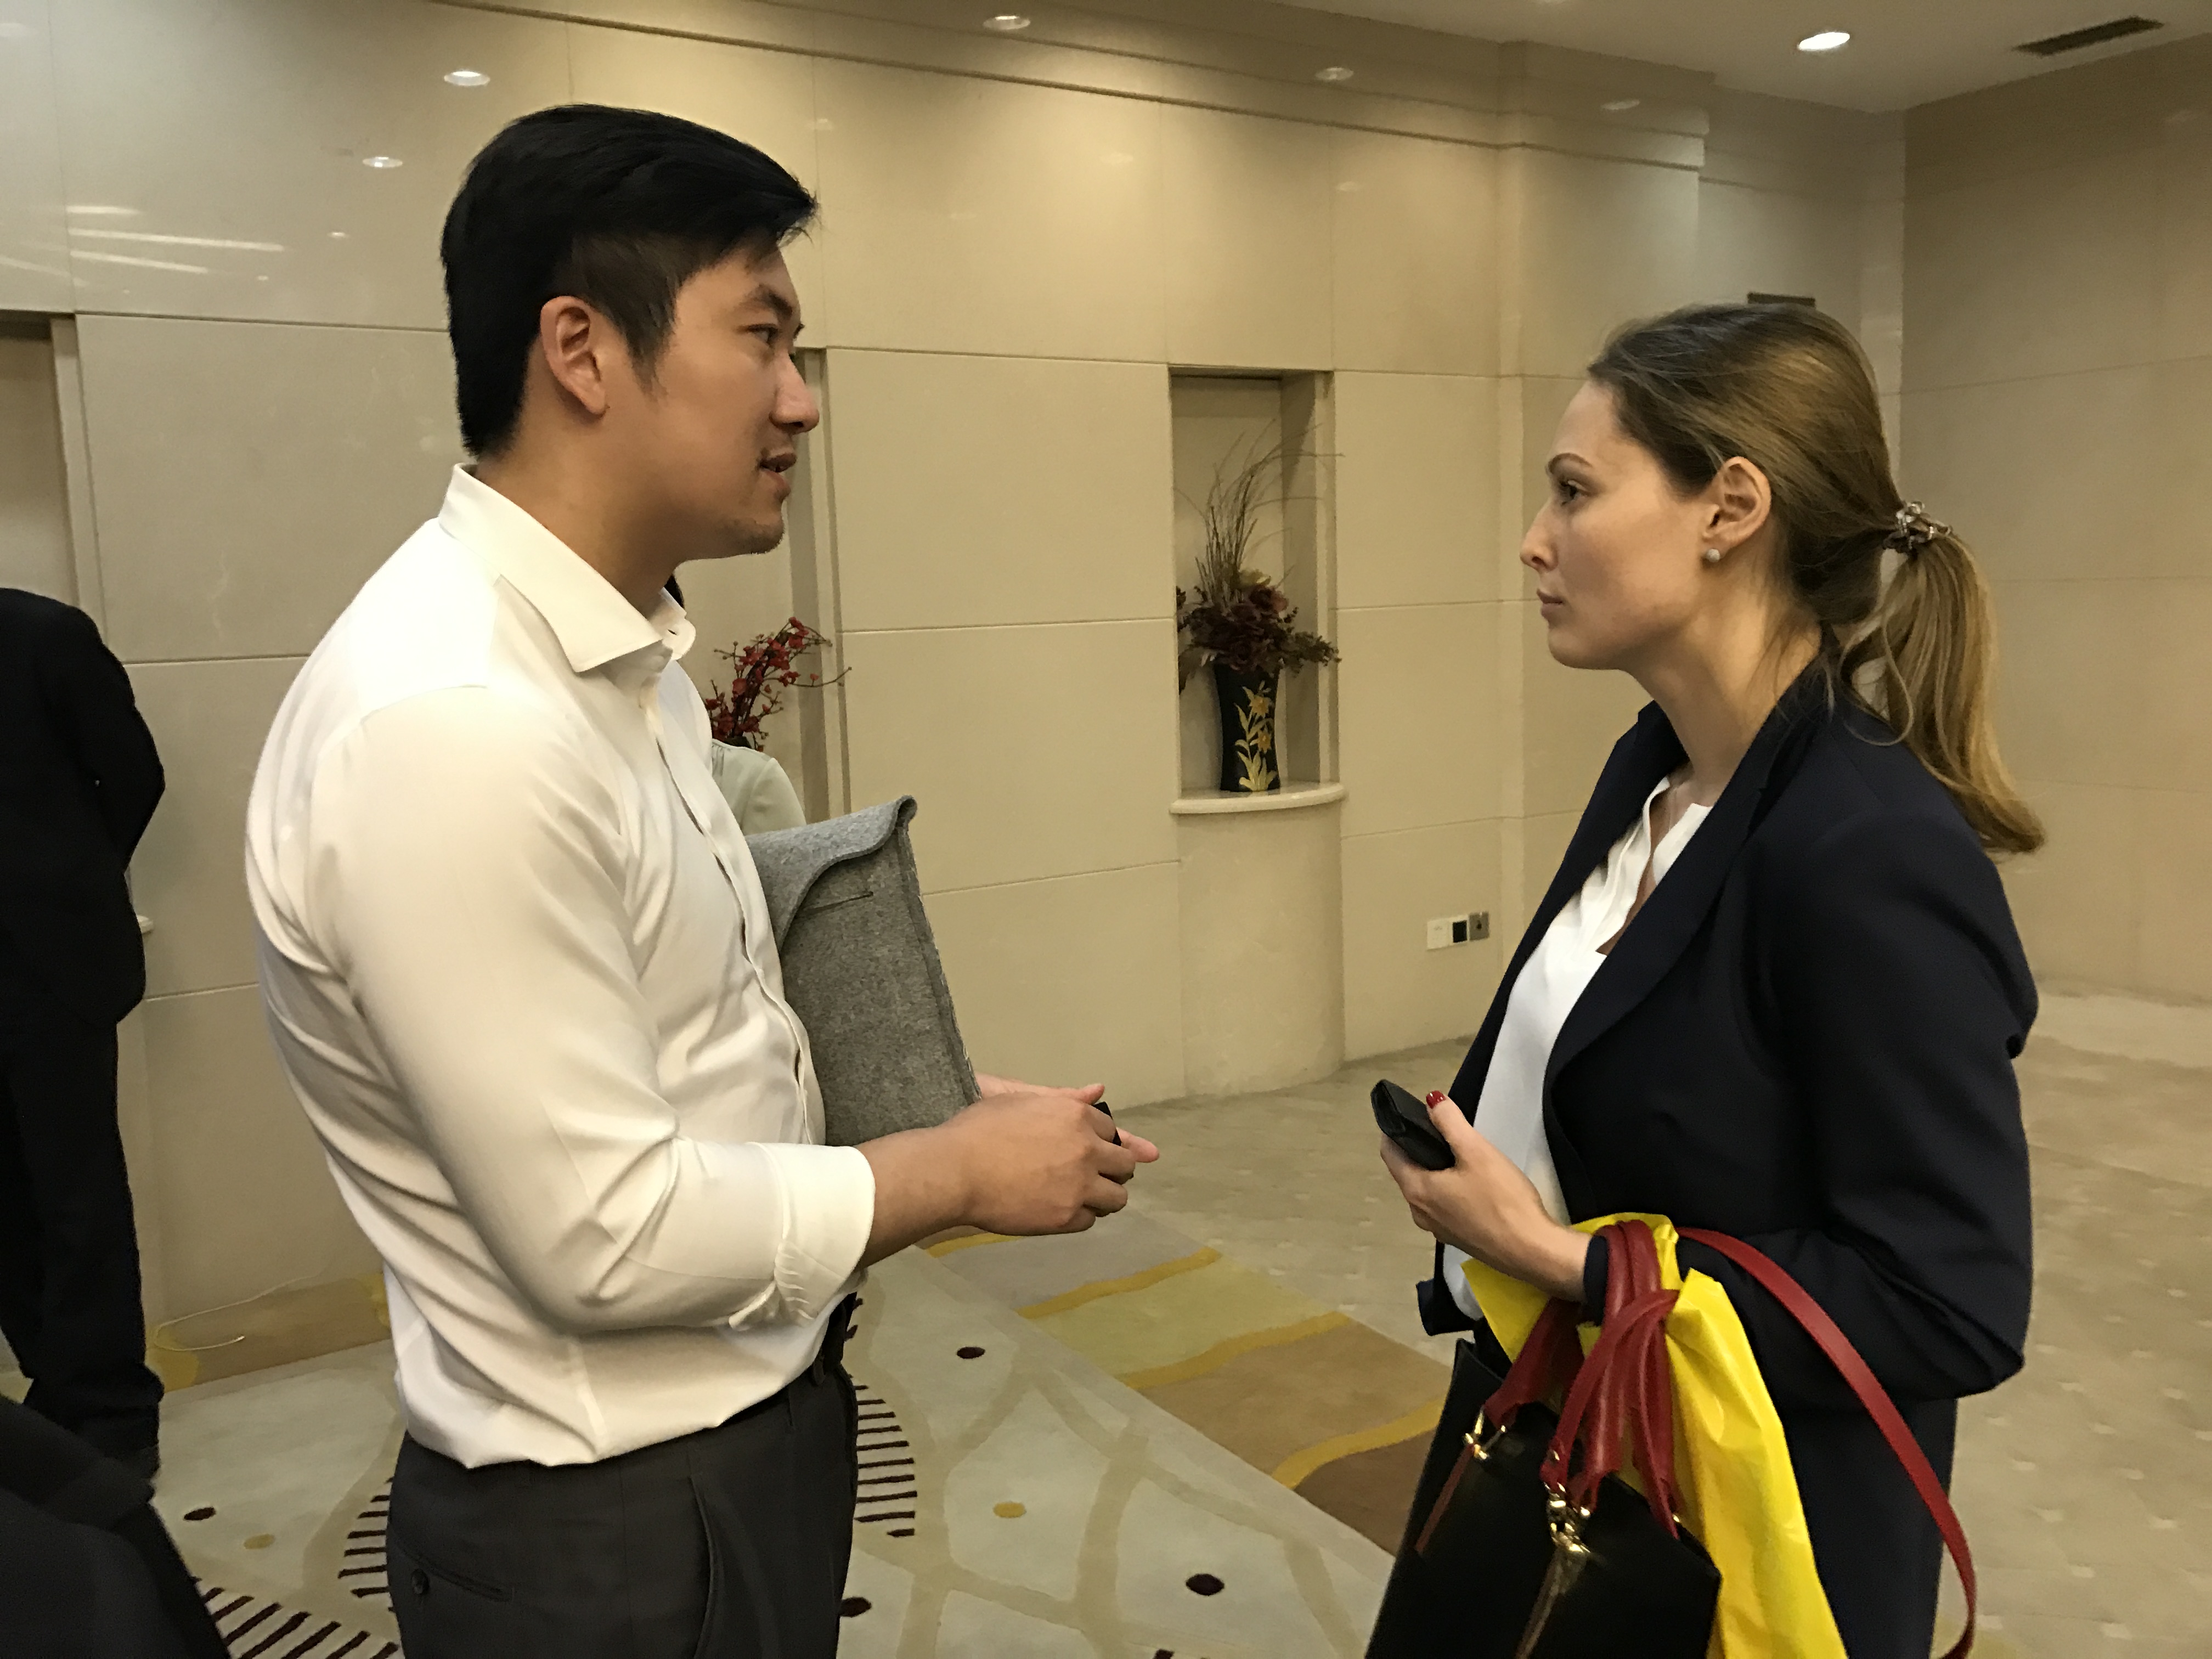 Russian lawyer in China, Partner